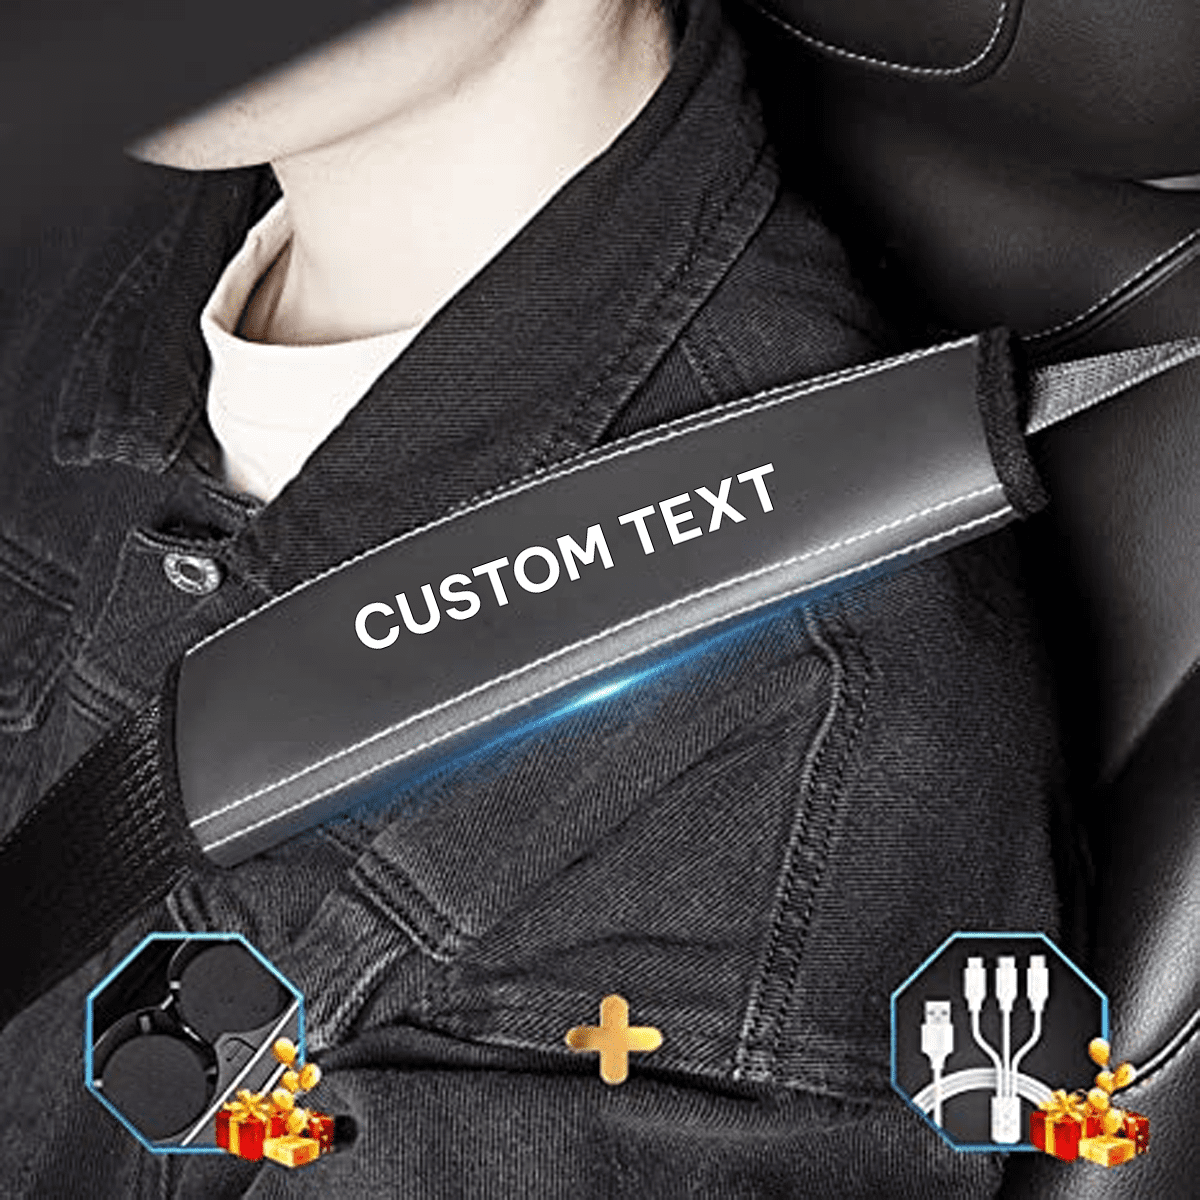 Custom Text and Logo Seat Belt Covers, Fit with Subaru, Microfiber Leather Seat Belt Shoulder Pads for More Comfortable Driving, Set of 2pcs - Delicate Leather